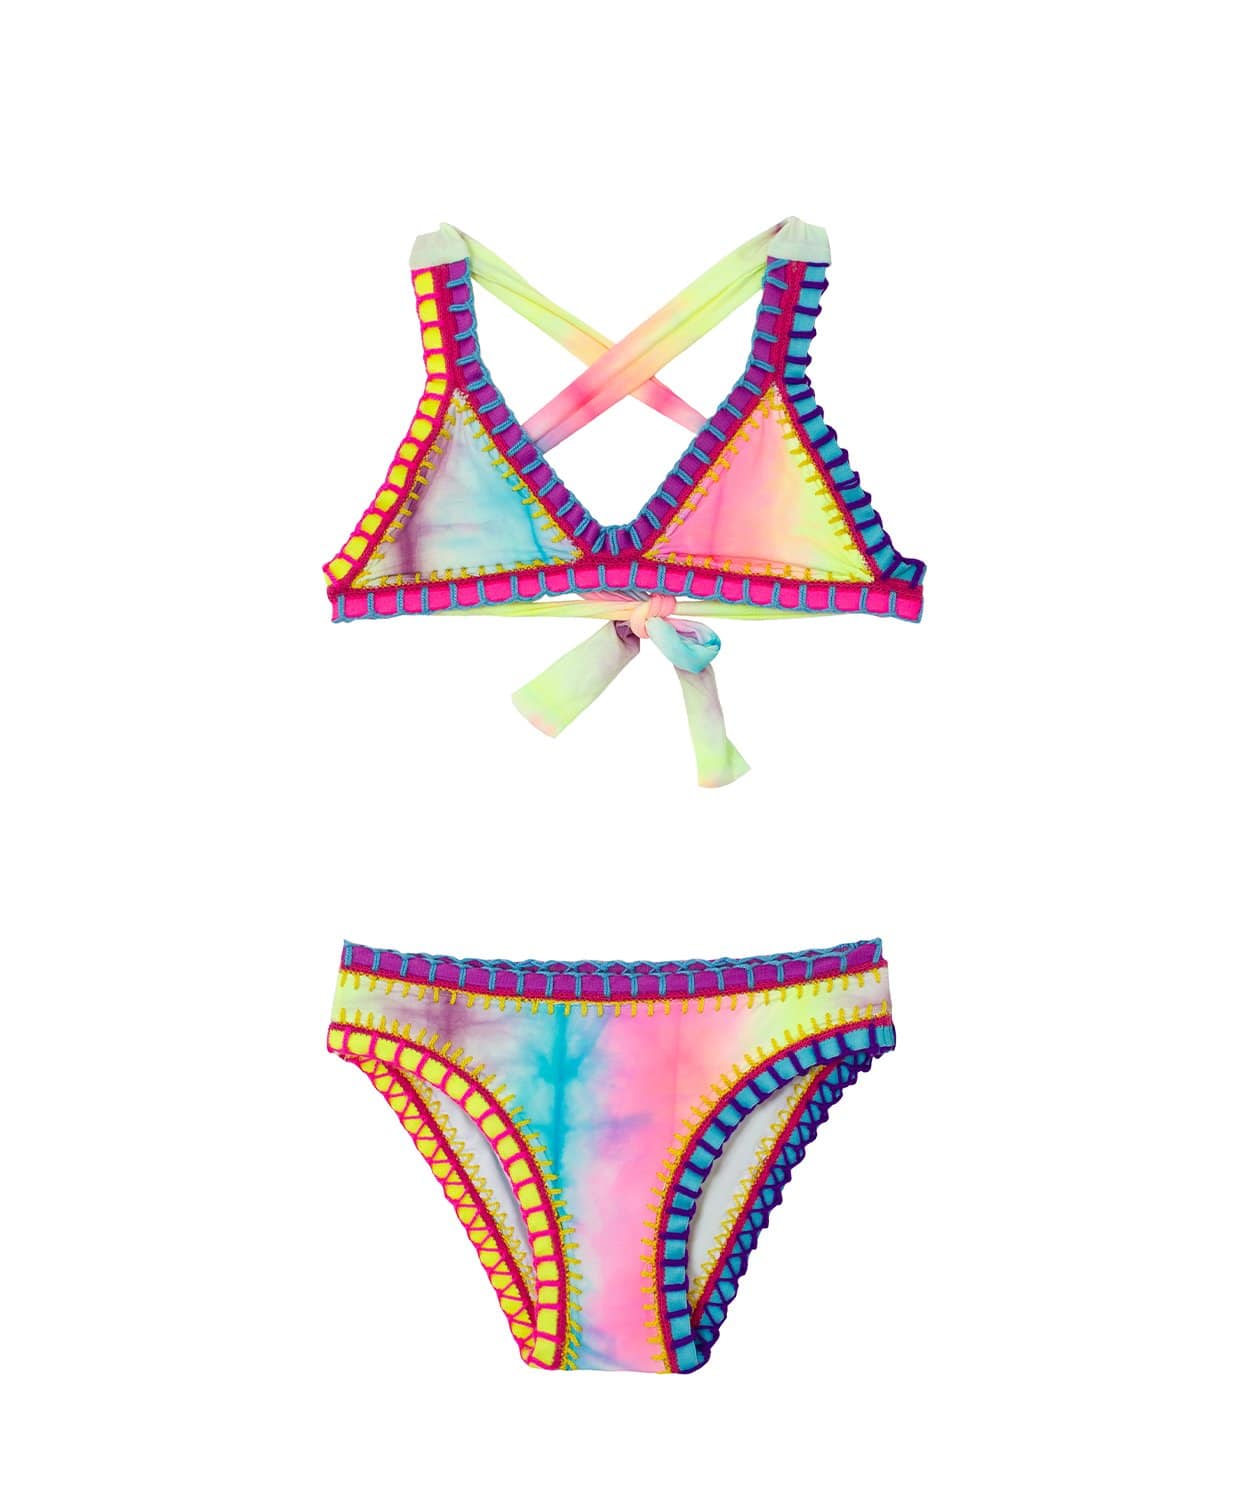 12 Best Age Appropriate Bikinis for Tweens and Teen Girls